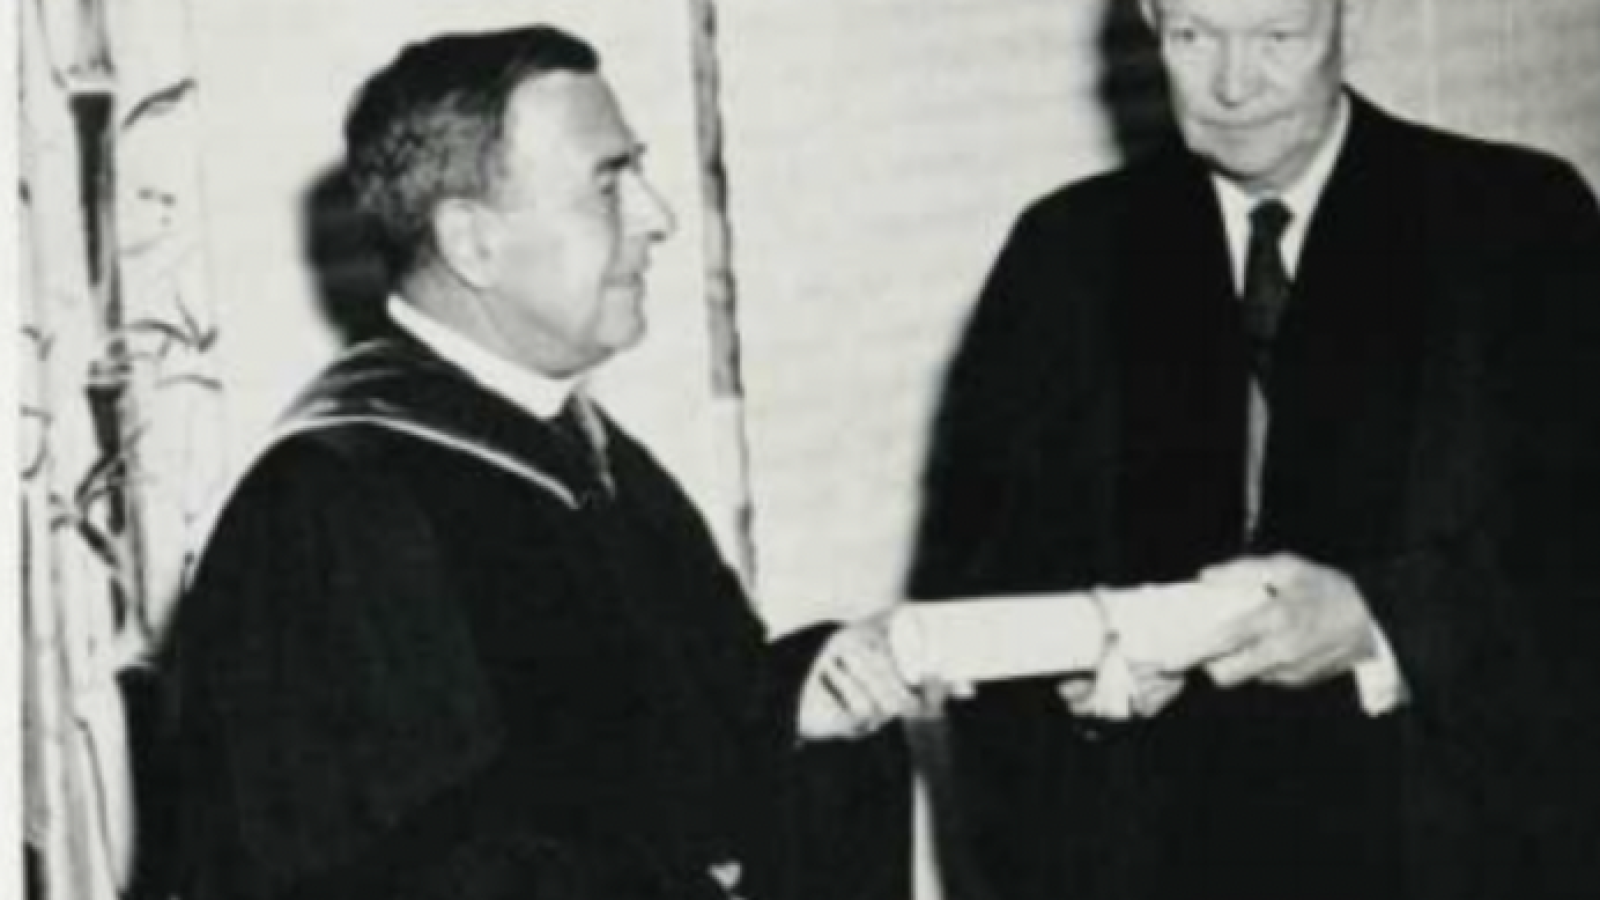 Eisenhower receiving an honorary degree during the dedication of the Edmond A. Walsh Memorial building in 1959.